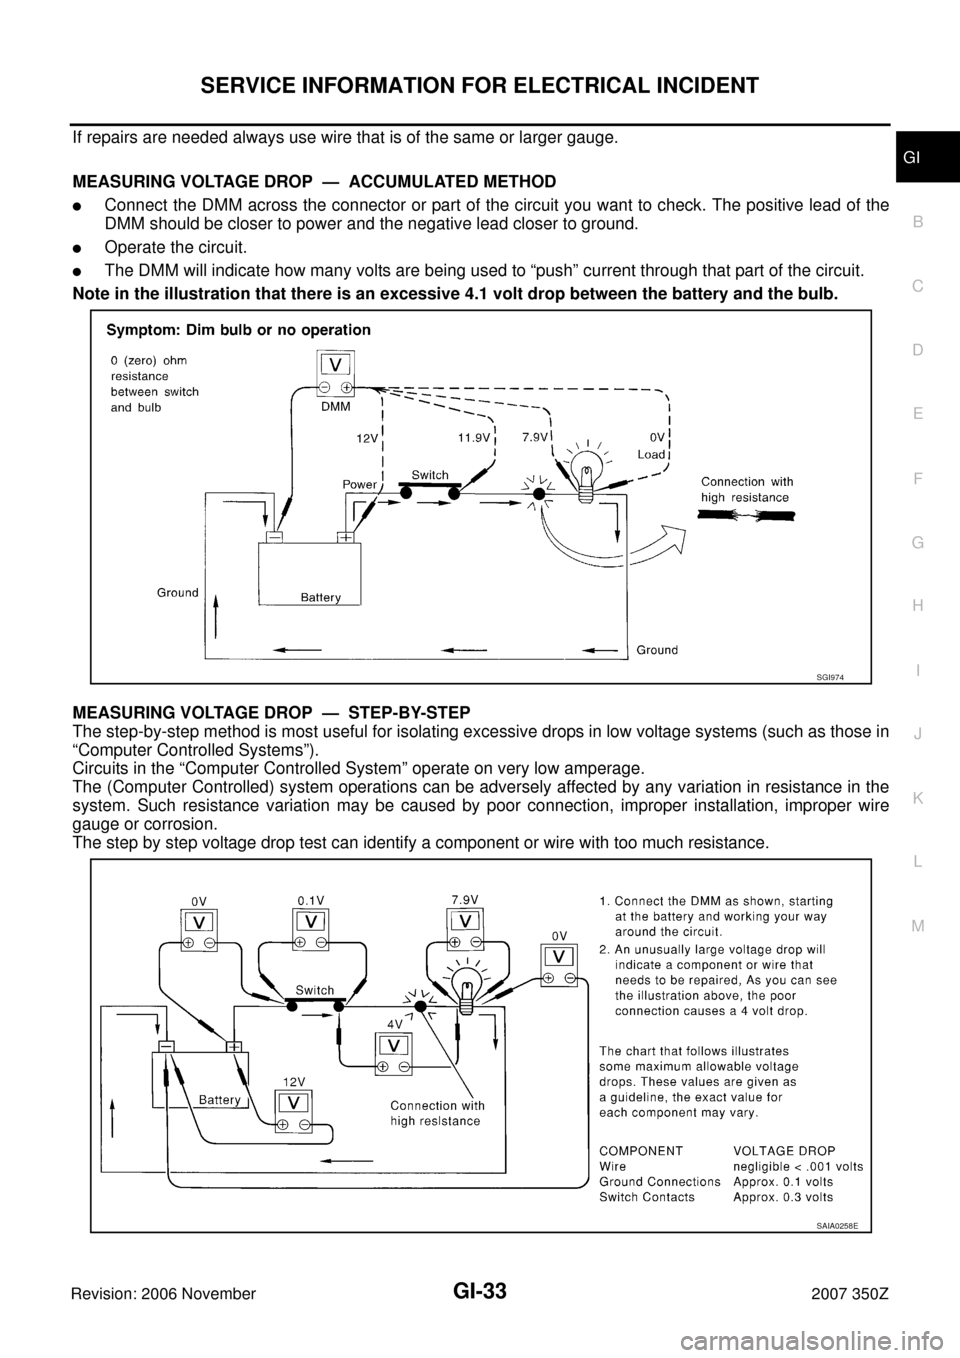 NISSAN 350Z 2007 Z33 General Information Workshop Manual SERVICE INFORMATION FOR ELECTRICAL INCIDENT
GI-33
C
D
E
F
G
H
I
J
K
L
MB
GI
Revision: 2006 November2007 350Z
If repairs are needed always use wire that is of the same or larger gauge.
MEASURING VOLTAG